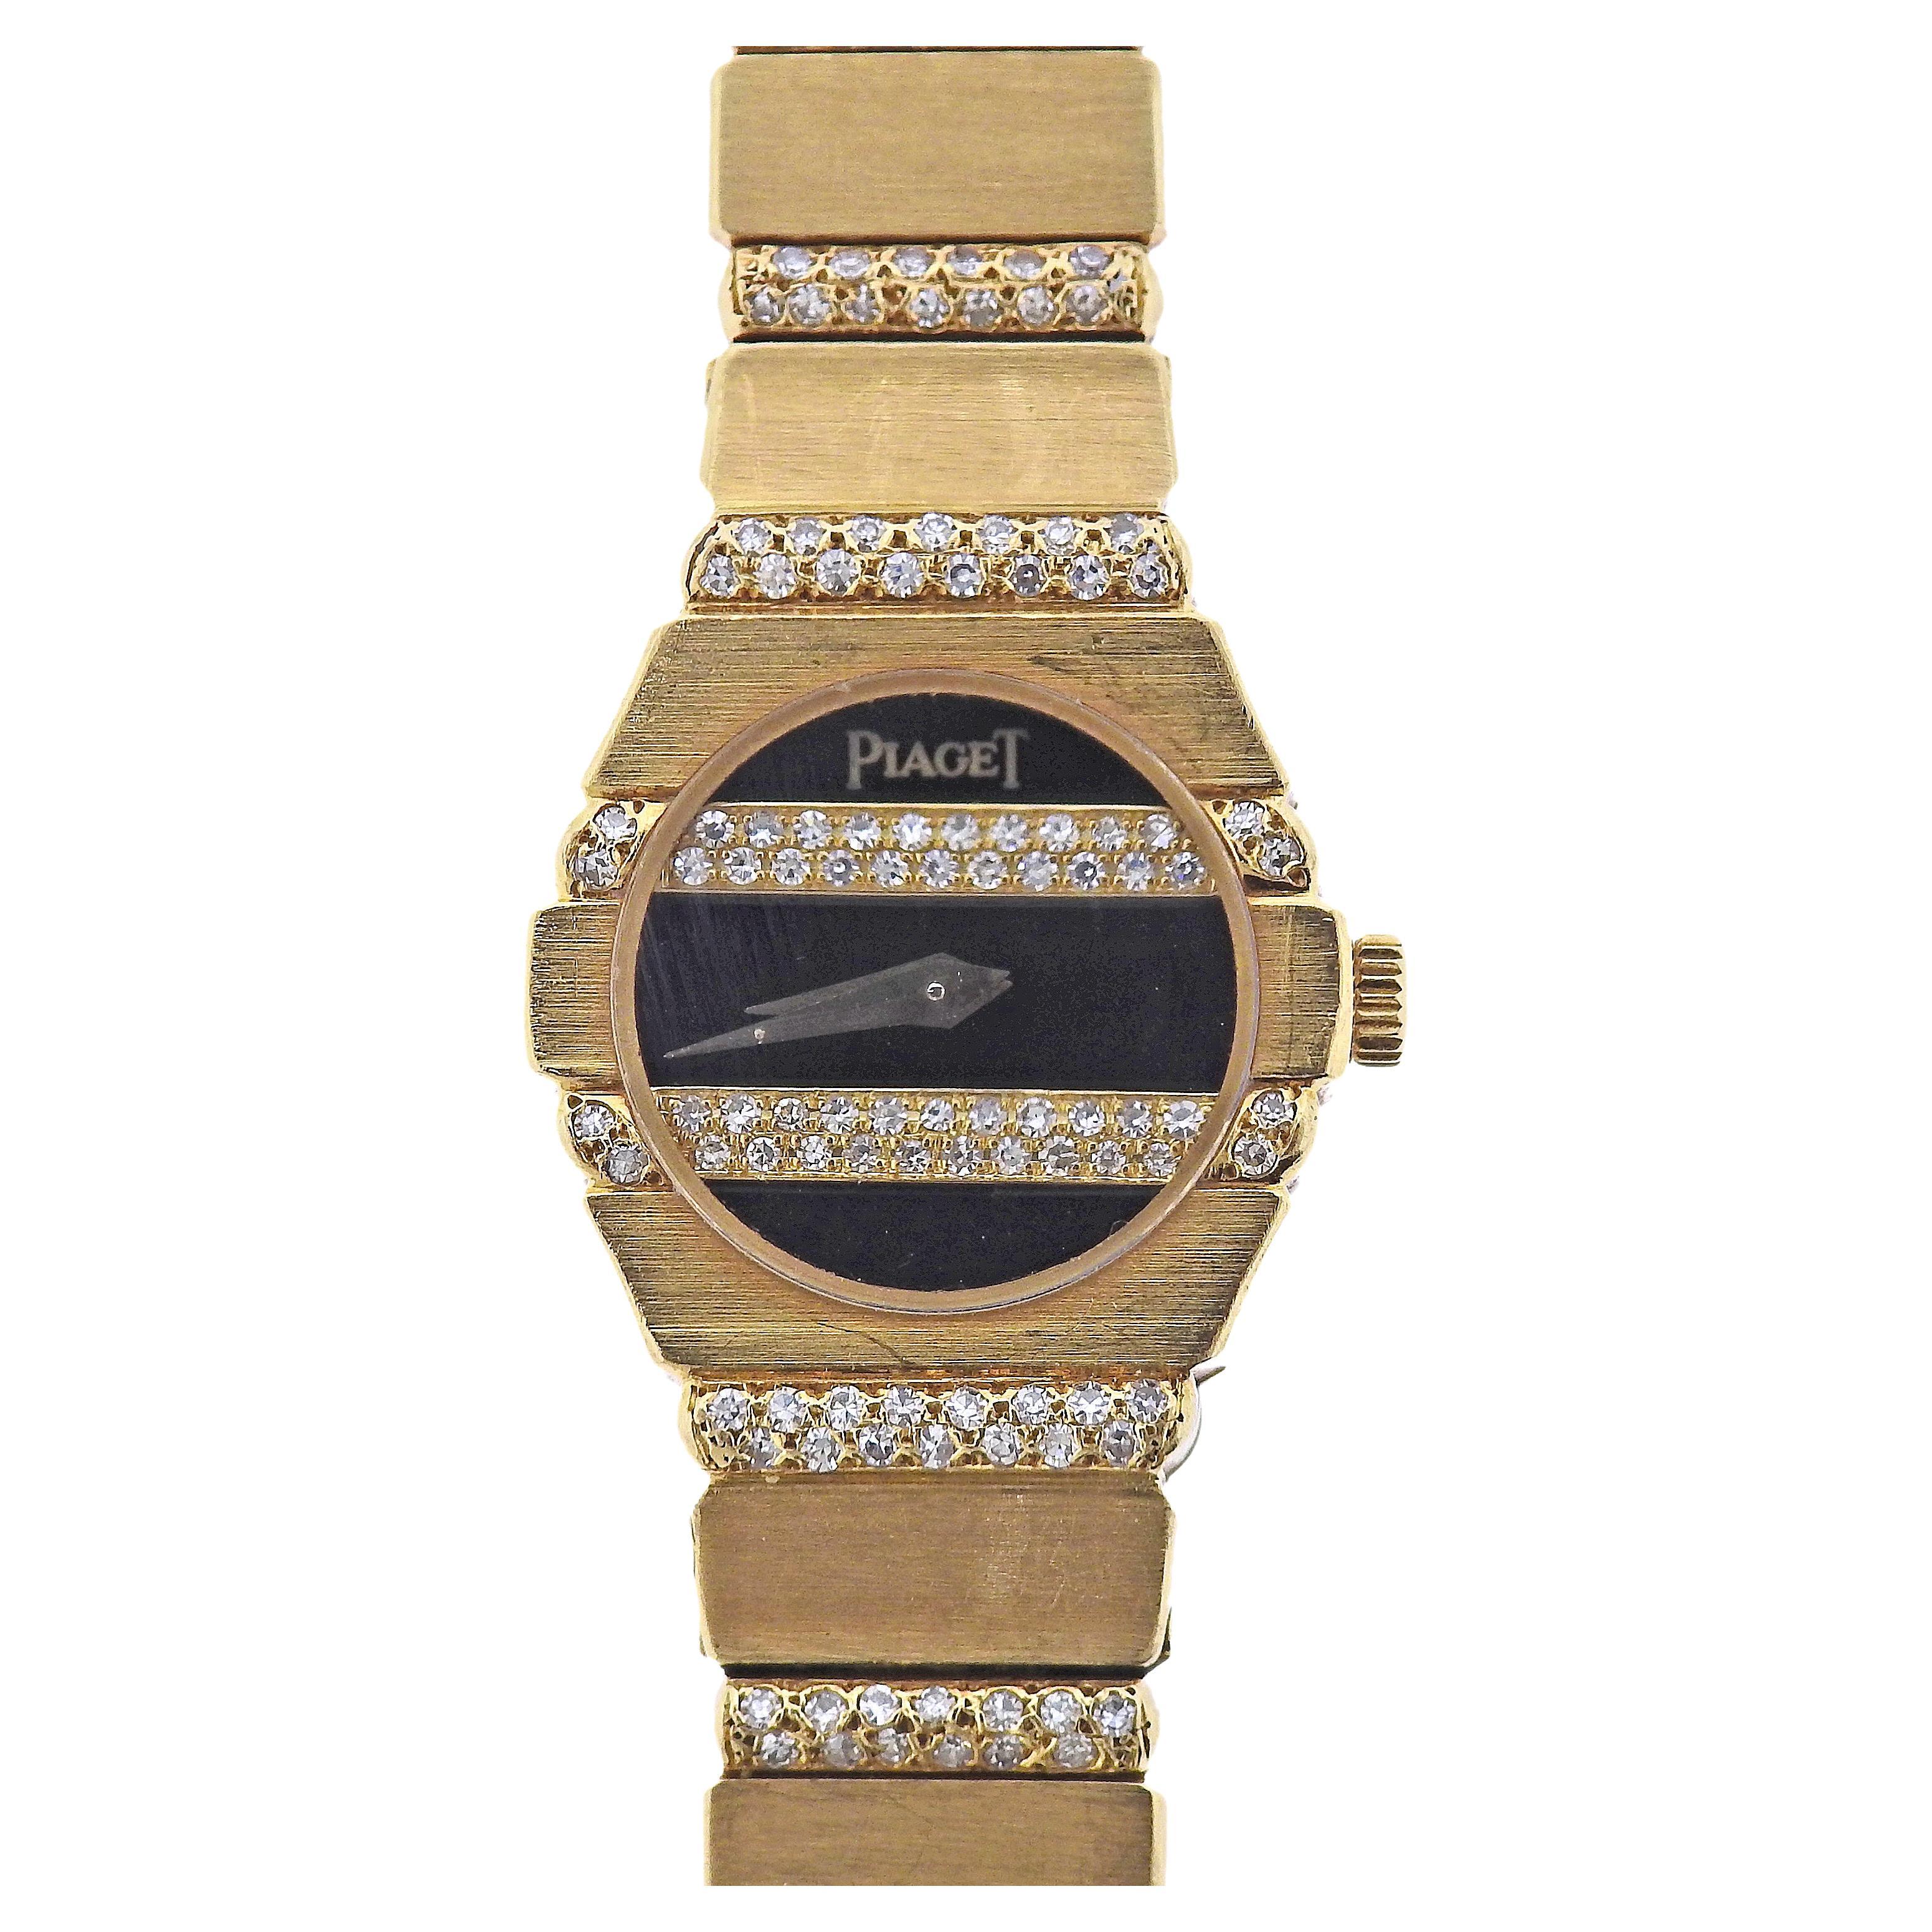 Piaget Polo Diamond Gold Watch For Sale